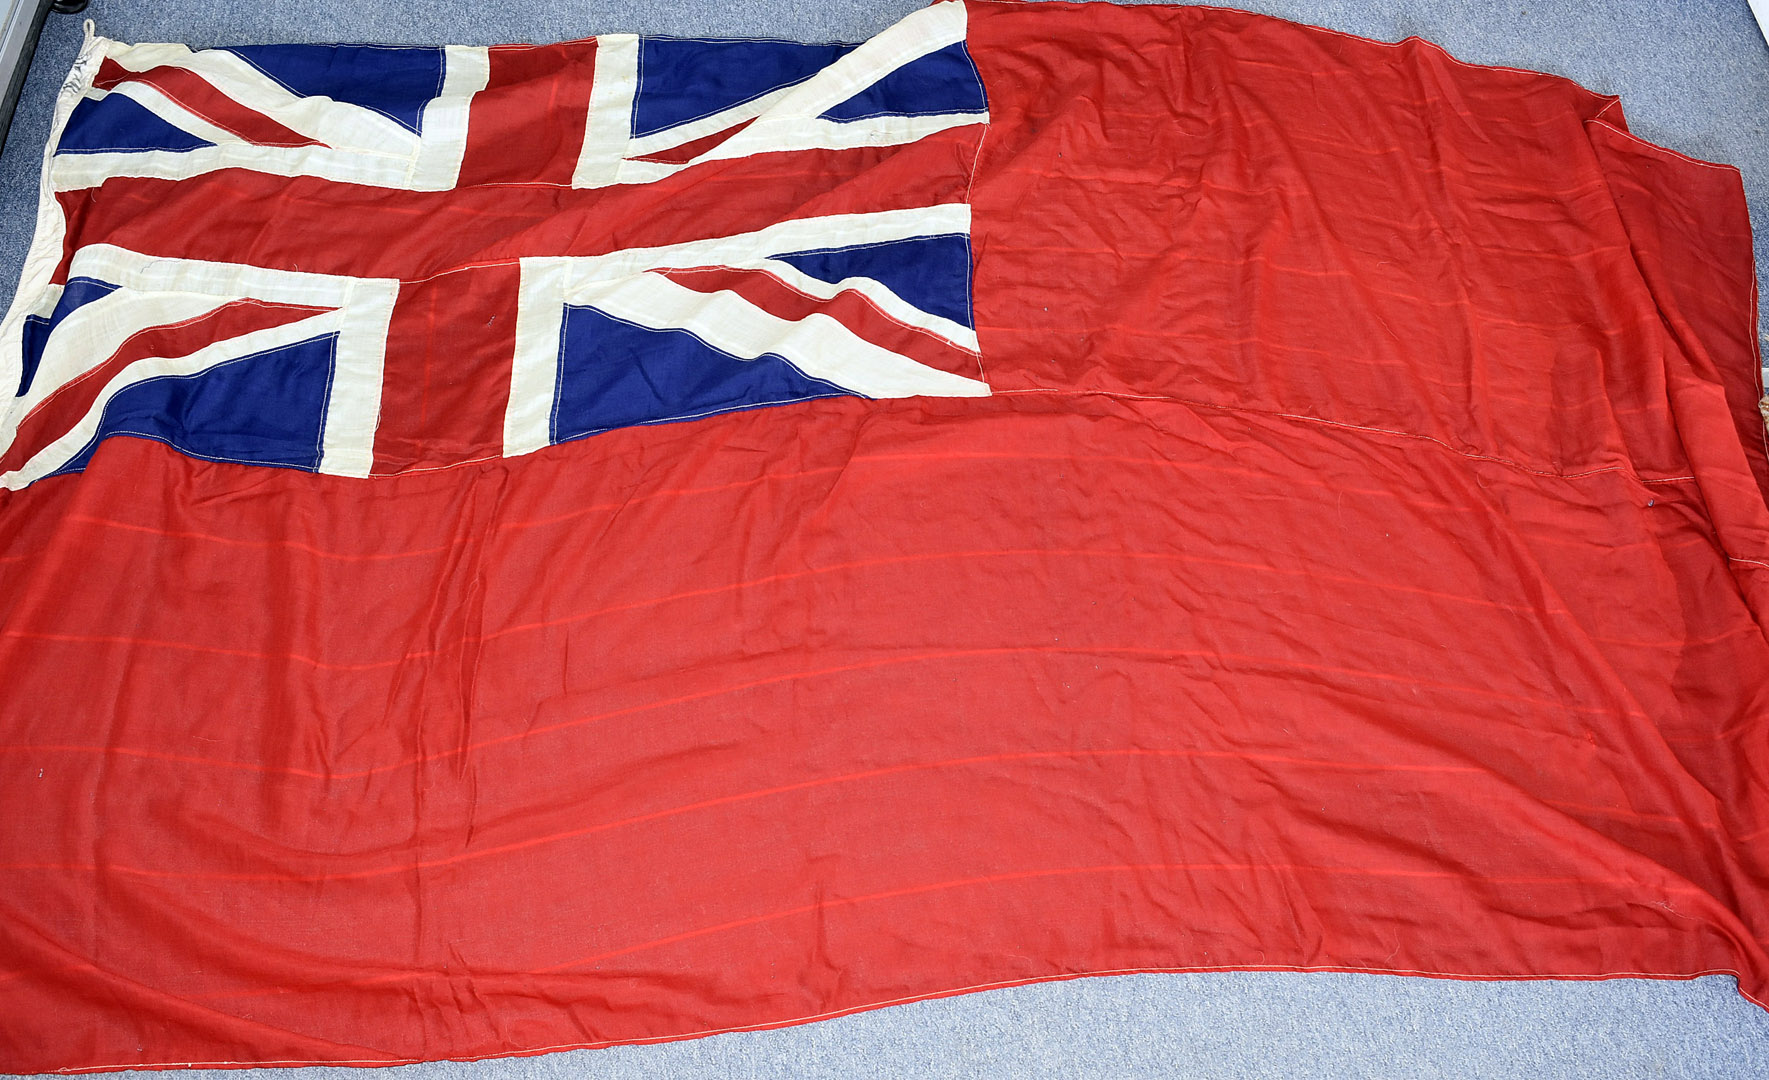 A late 19th century/early 20th century large British Red Ensign flag, all hand stitched, marked